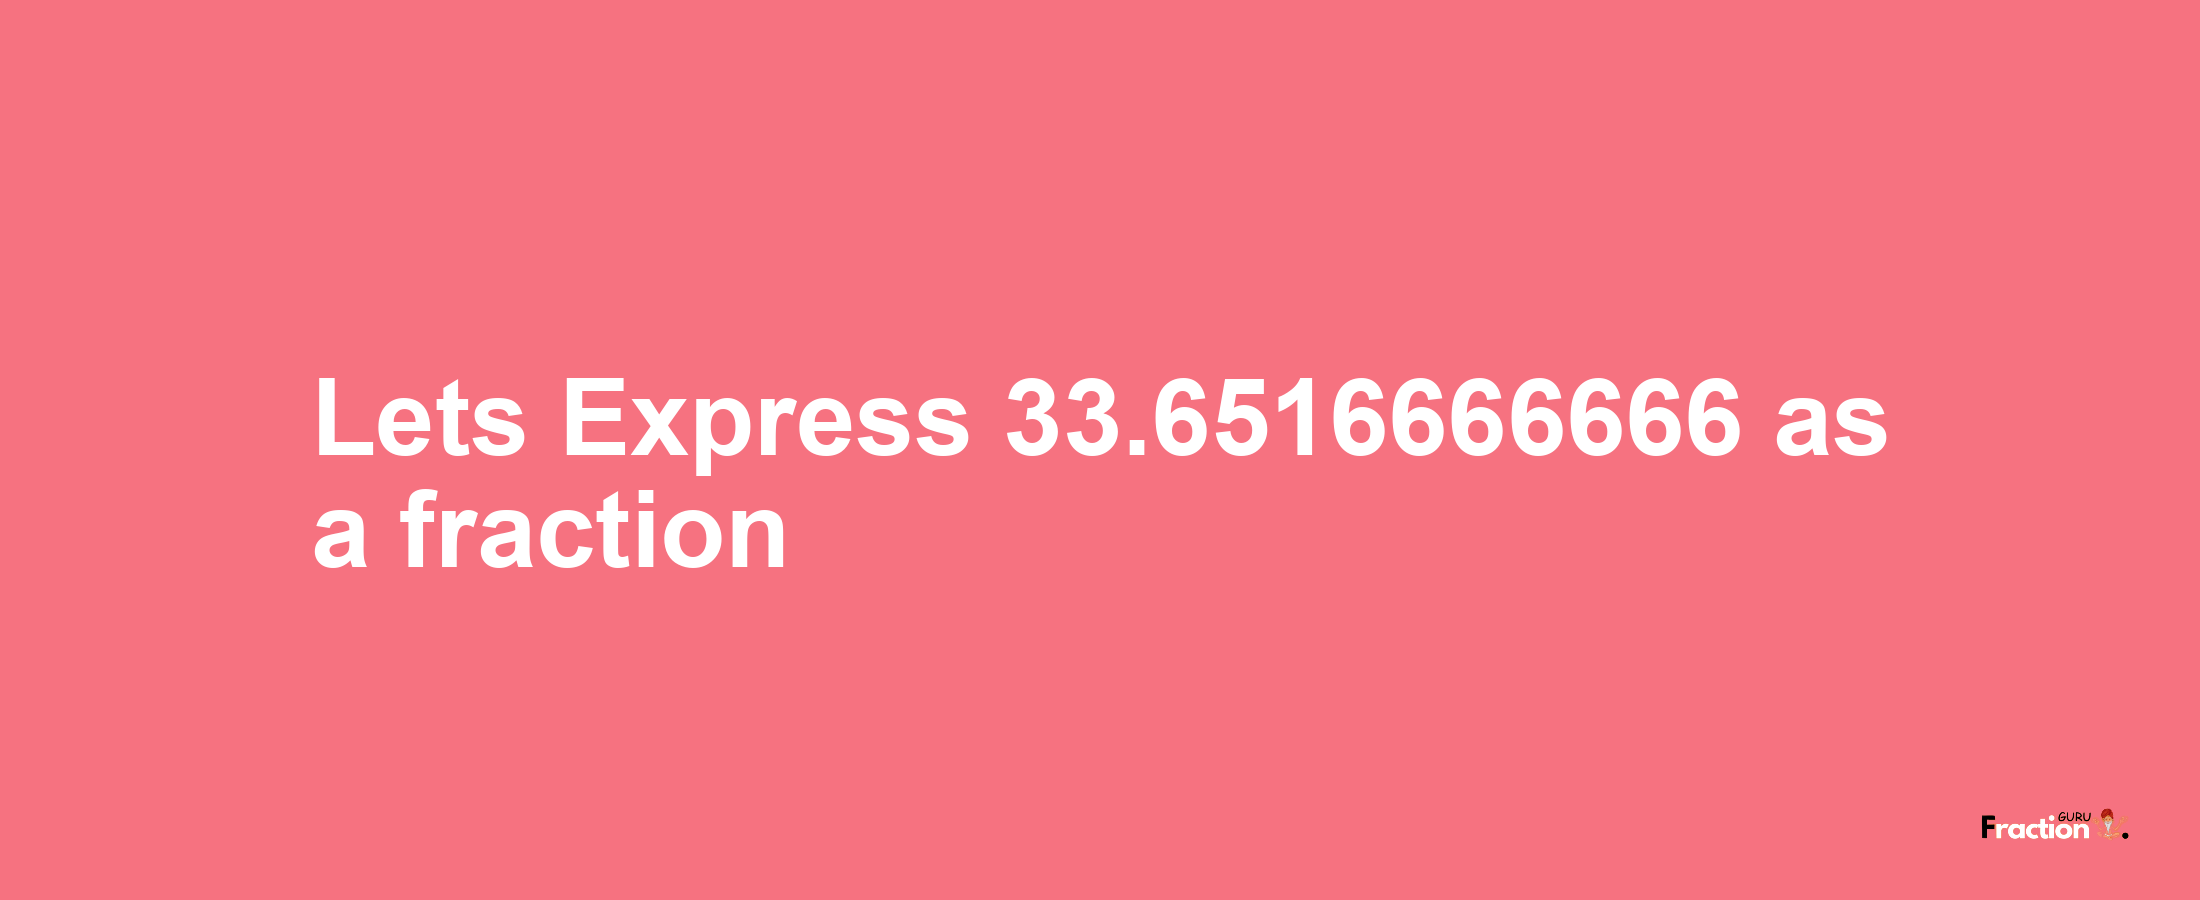 Lets Express 33.6516666666 as afraction